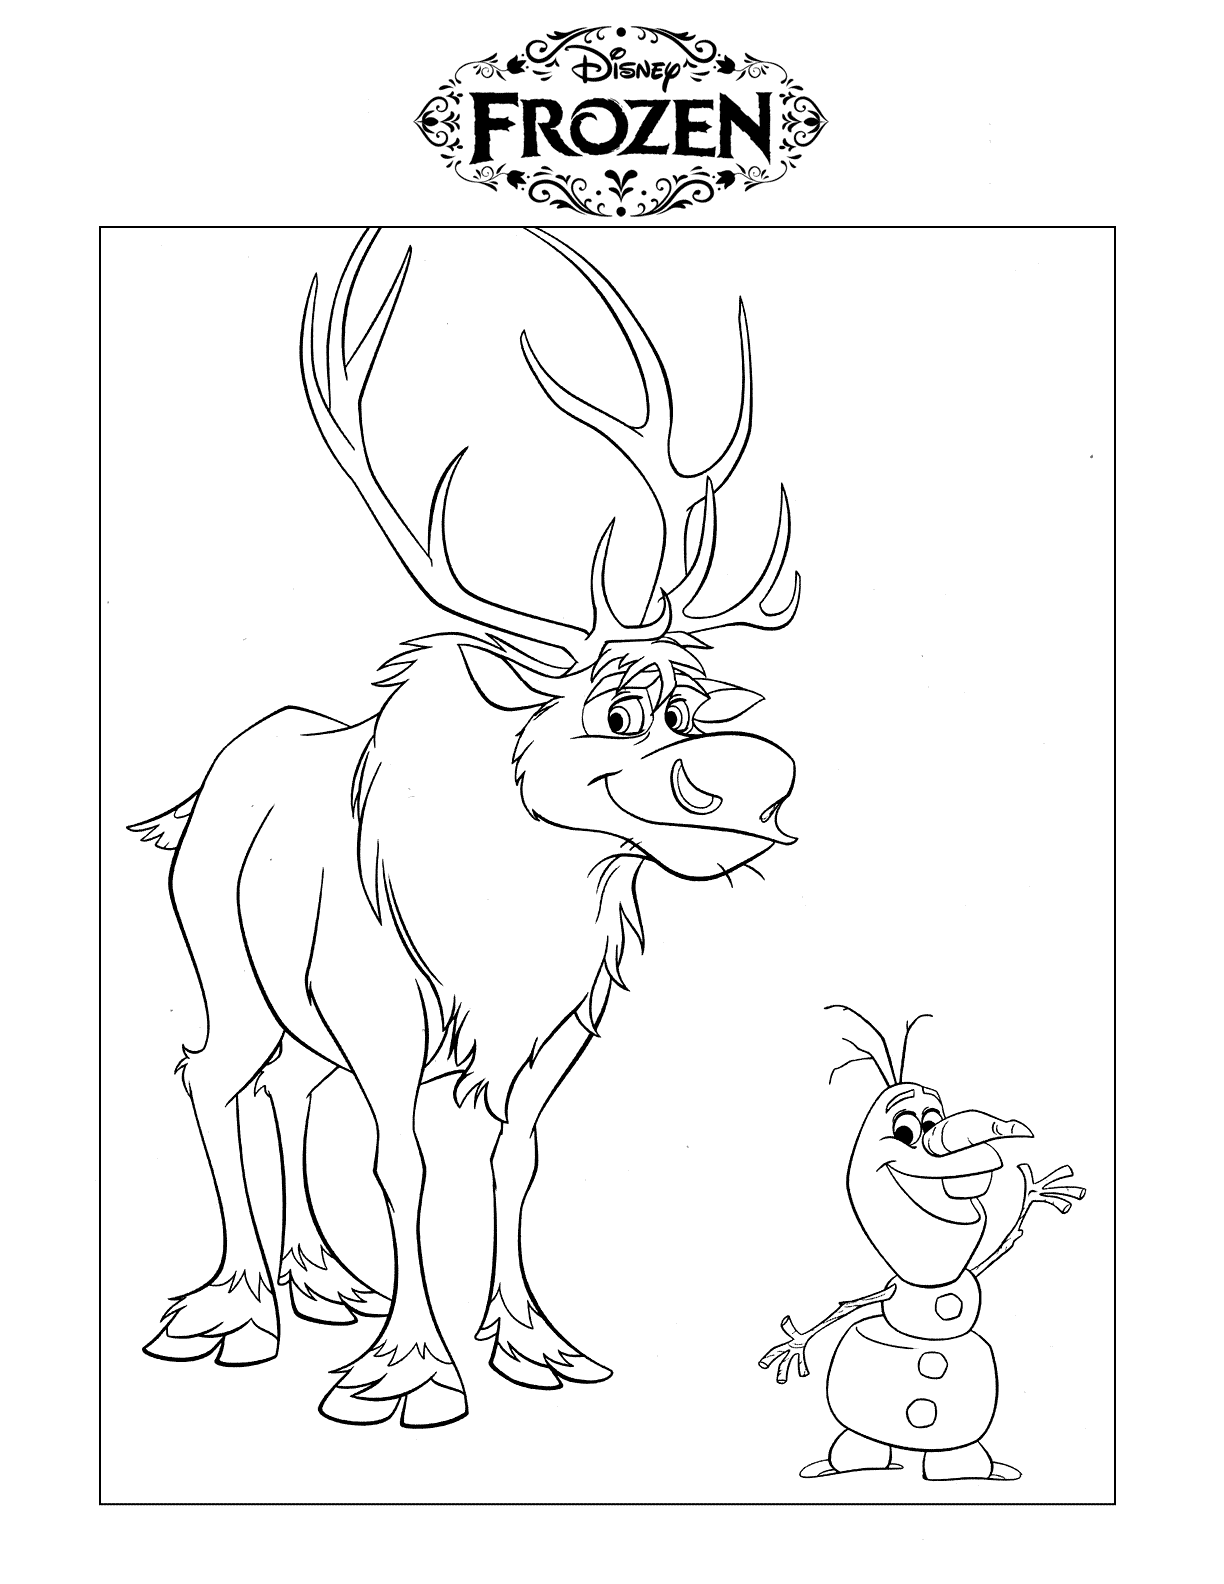 Olaf And Sven Coloring Page